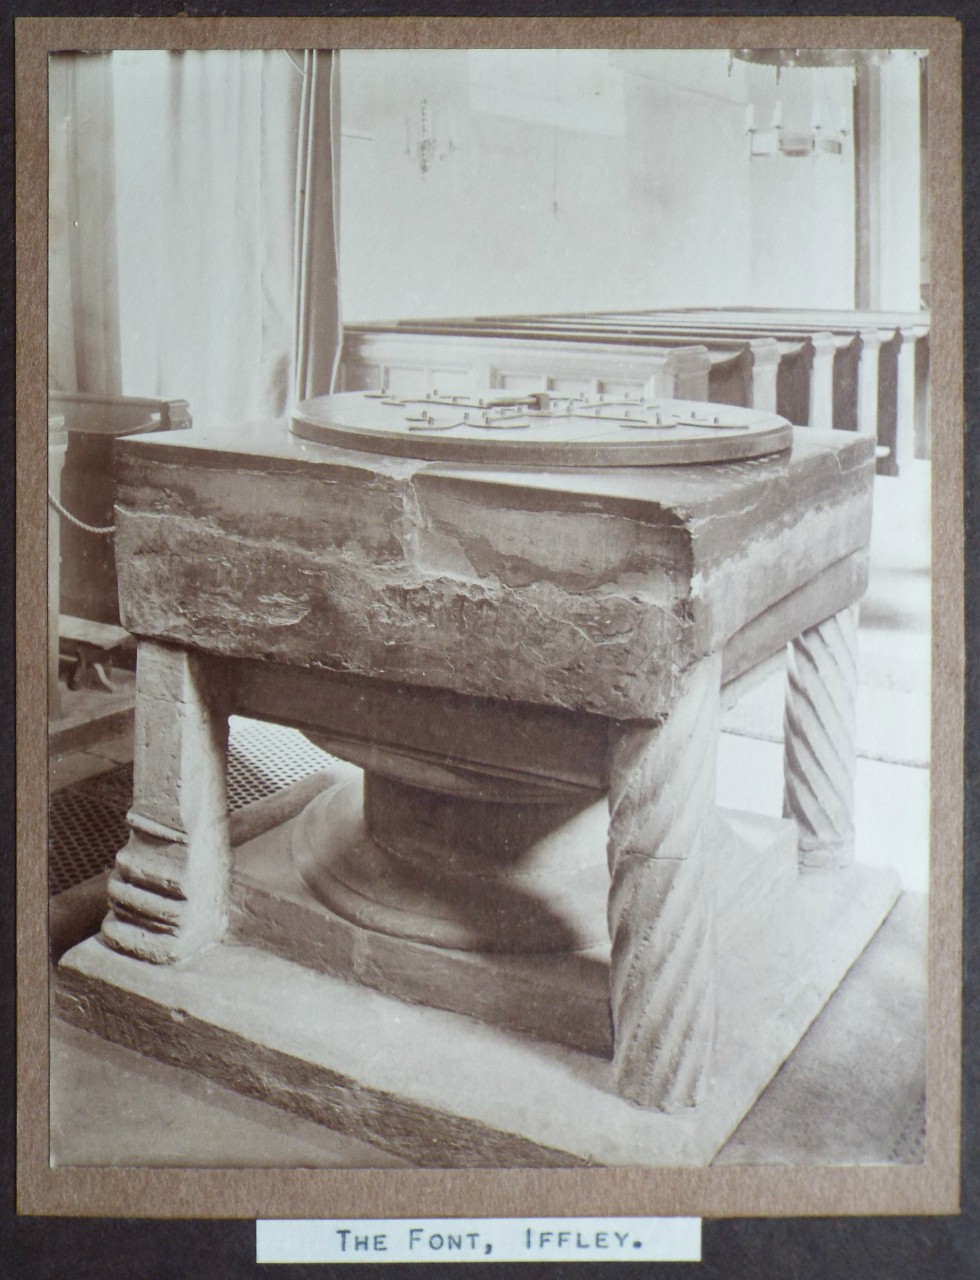 Photograph - The Font, Iffley.